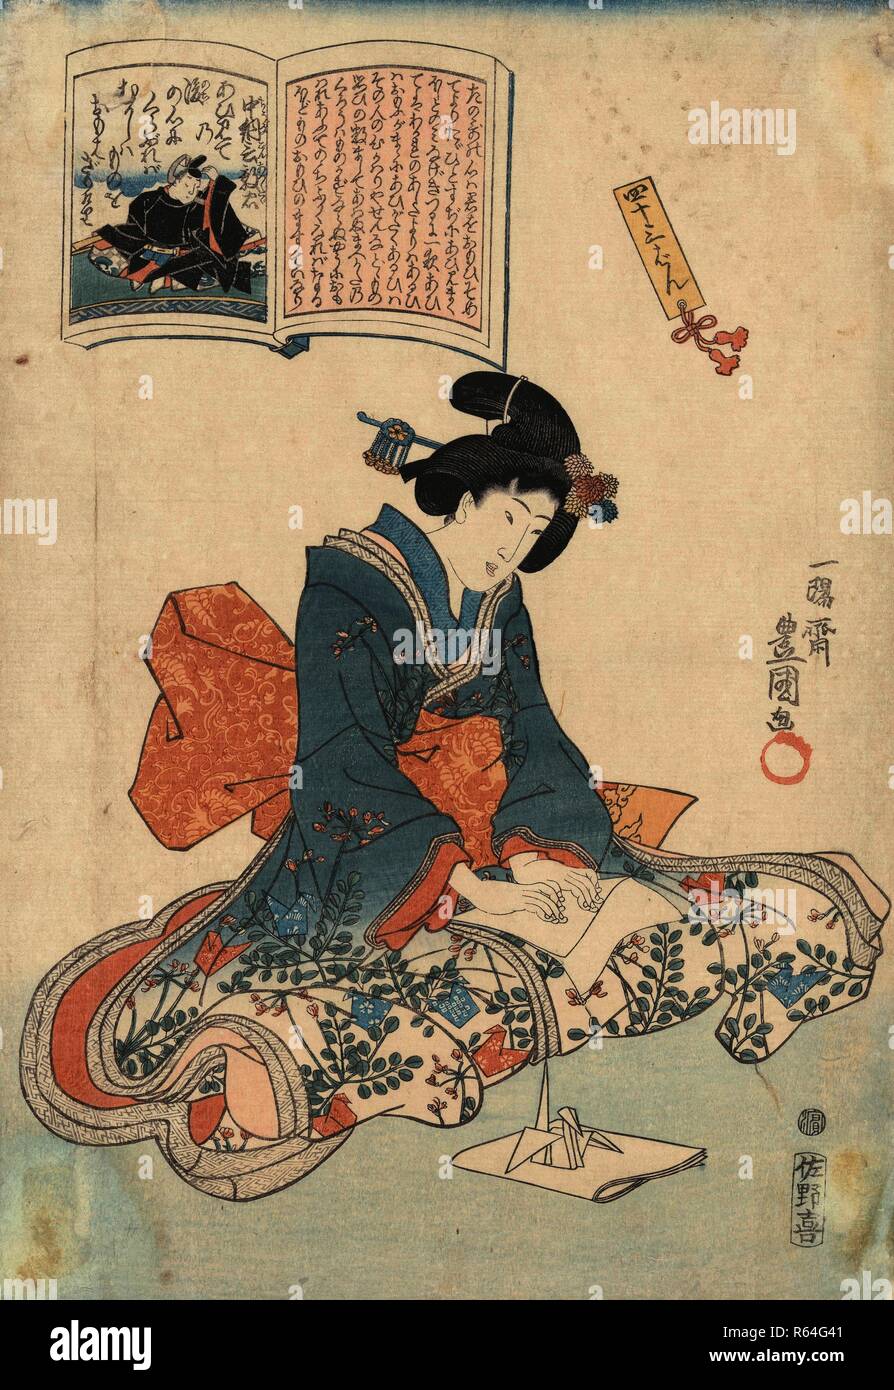 Chunagon Atsutada, nummer Forty-three from the series Collection of Pictures of the Hundred Poems by One Poet Each. Date: 1844-1847. Dimensions: 37 cm x 26 cm. Museum: Van Gogh Museum, Amsterdam. Author: KUNISADA, UTAGAWA. Stock Photo